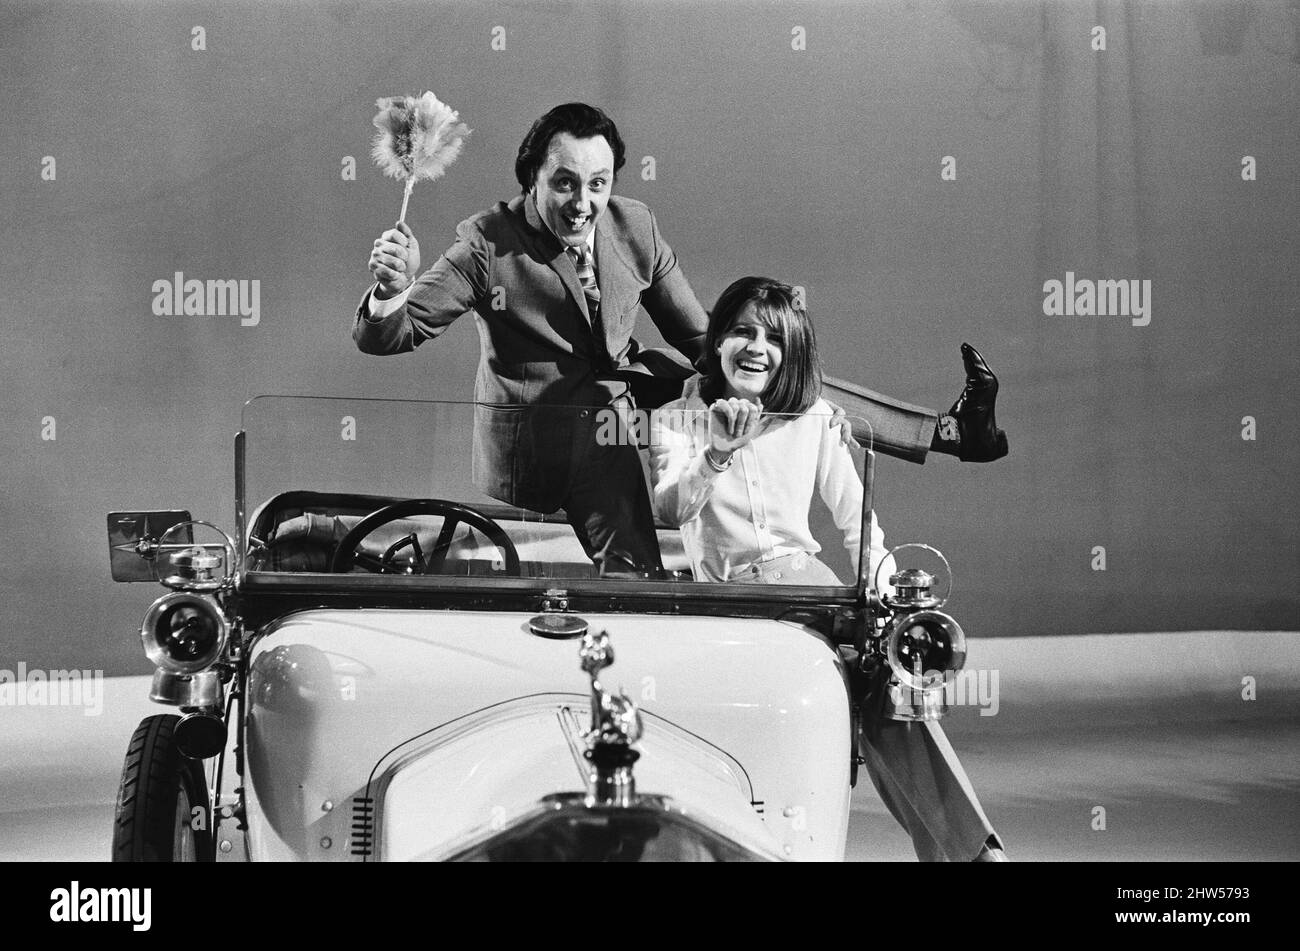 Sandie Shaw and Ken Dodd appear on the ABC Television Show 'Doddy's Music Box.' They are pictured in the 1912 Rover car used in the show, which is filmed in Didsbury, Manchester. 24th January 1967. Stock Photo